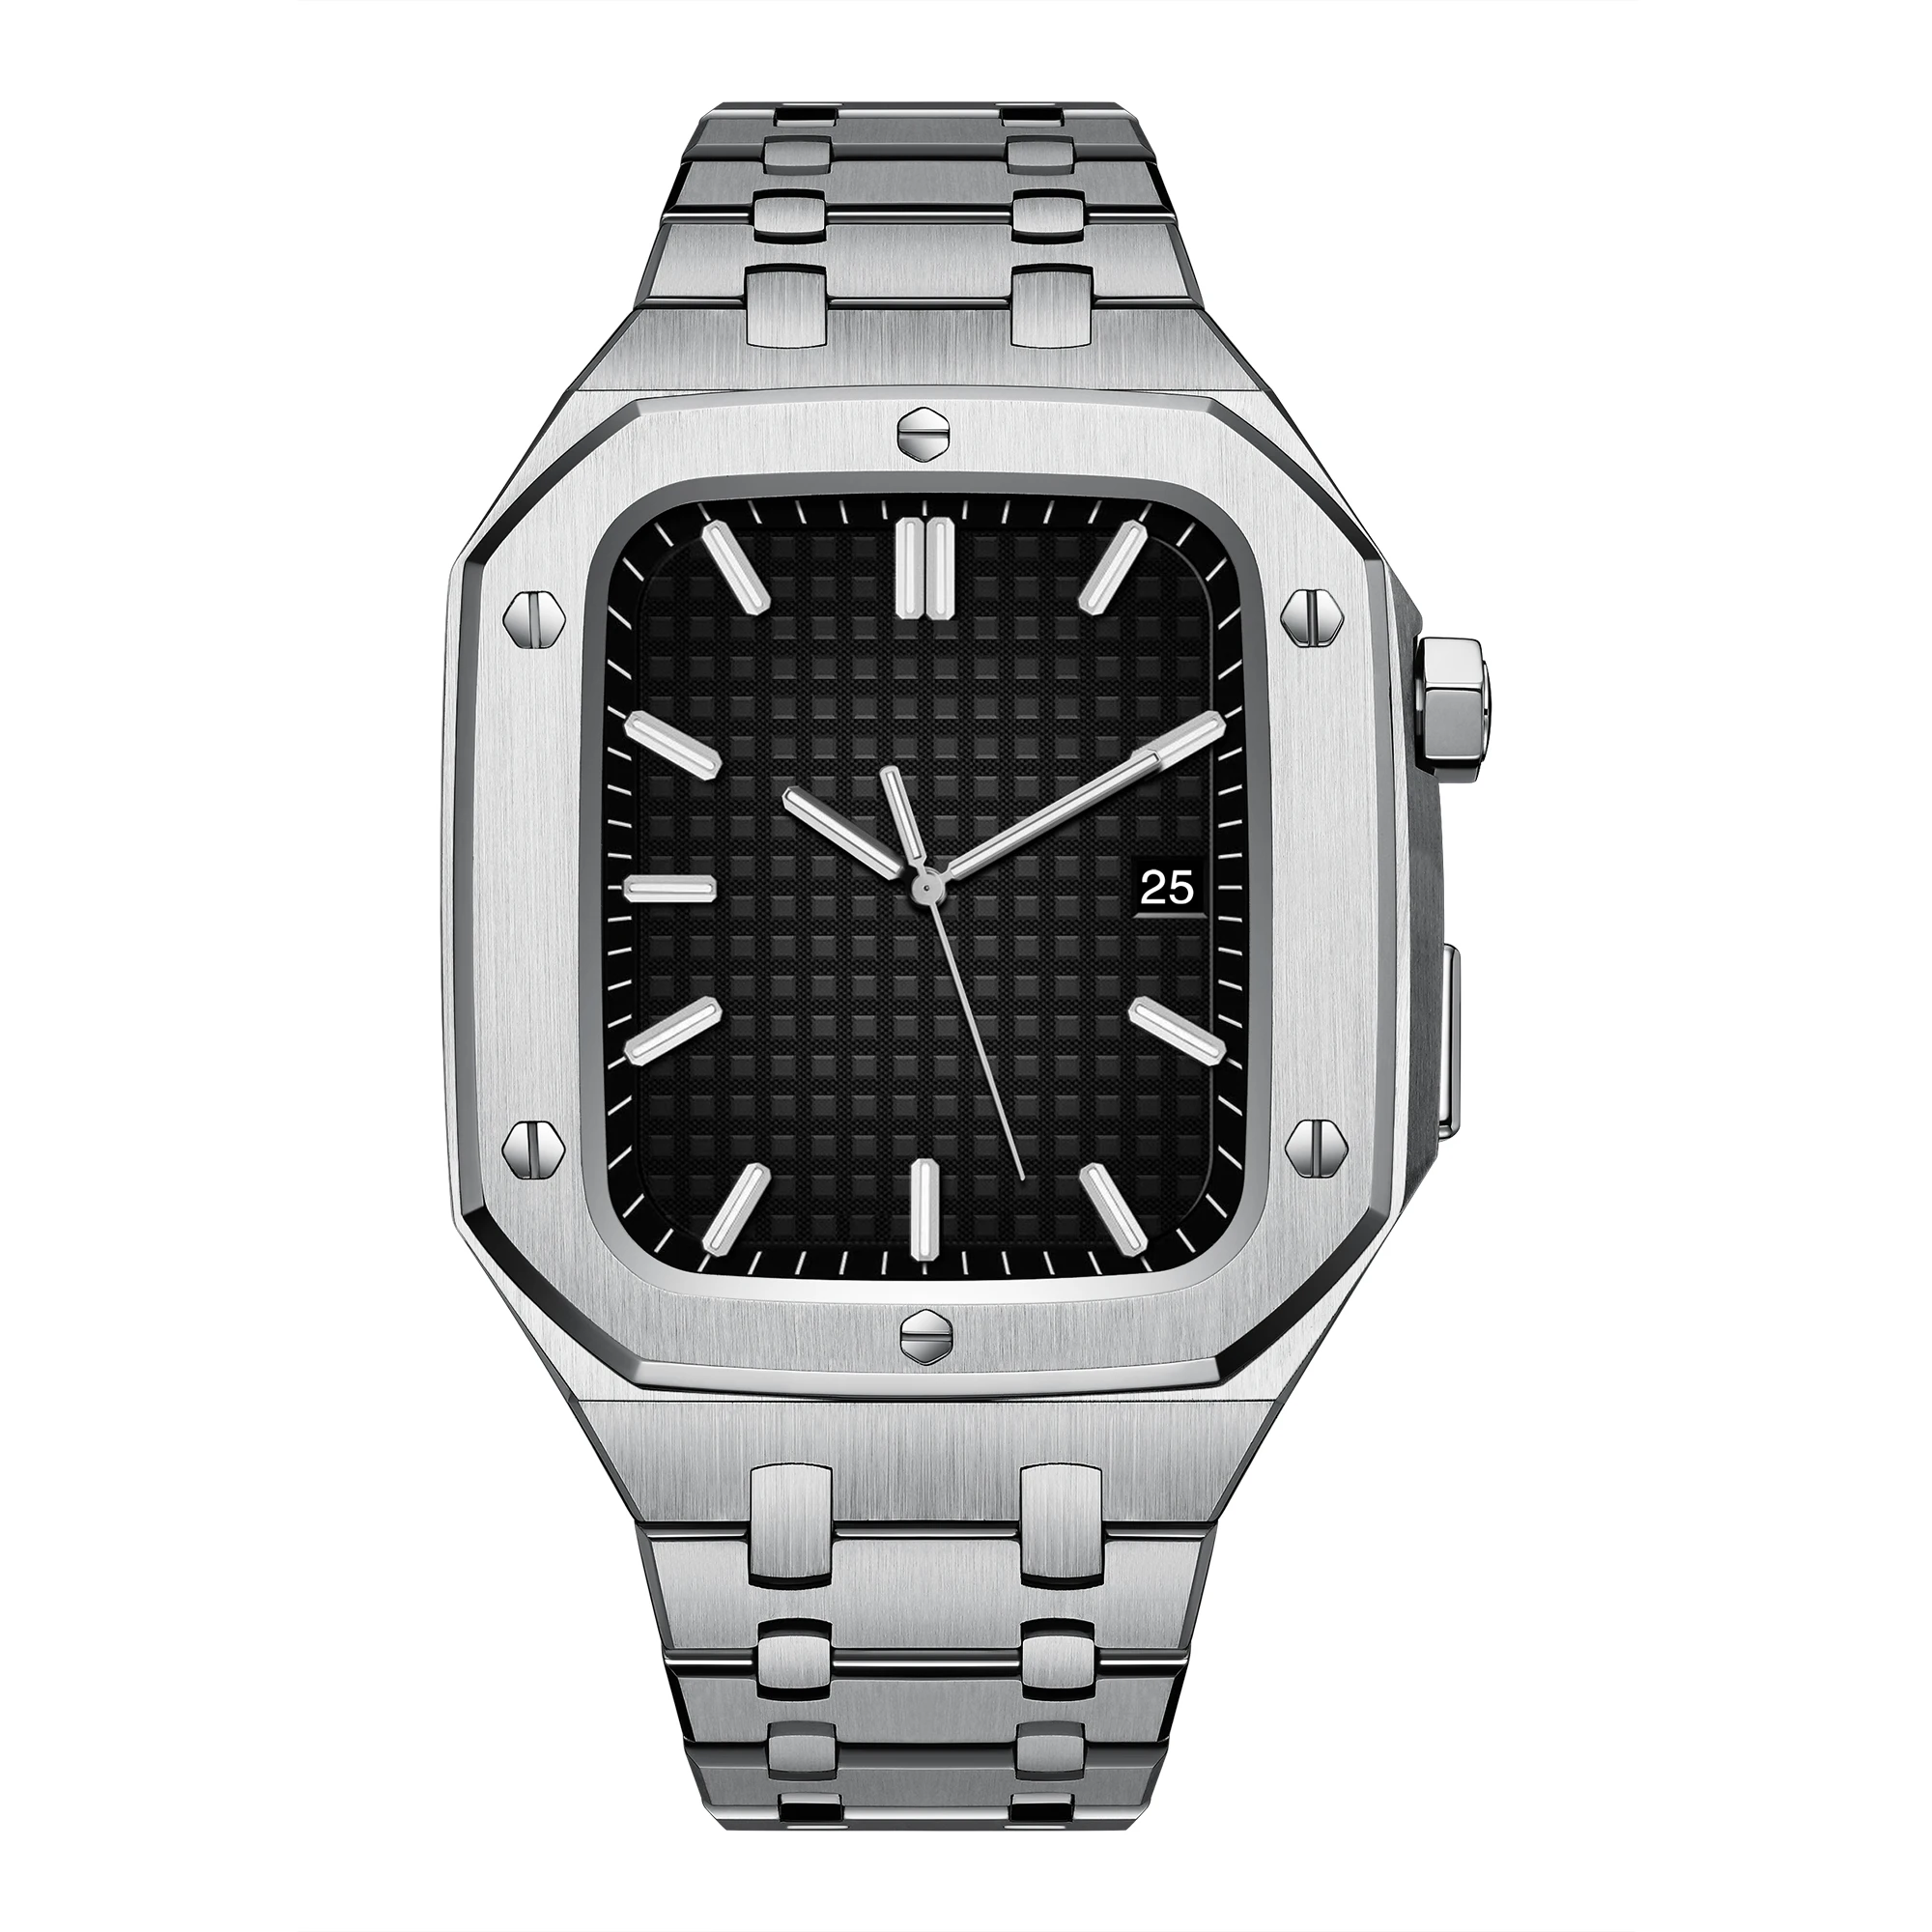 VDEAR Wholesale ap style 45MM stainless steel watch bezel case and strap luxury For Apple Series 4/5/6 iwatch